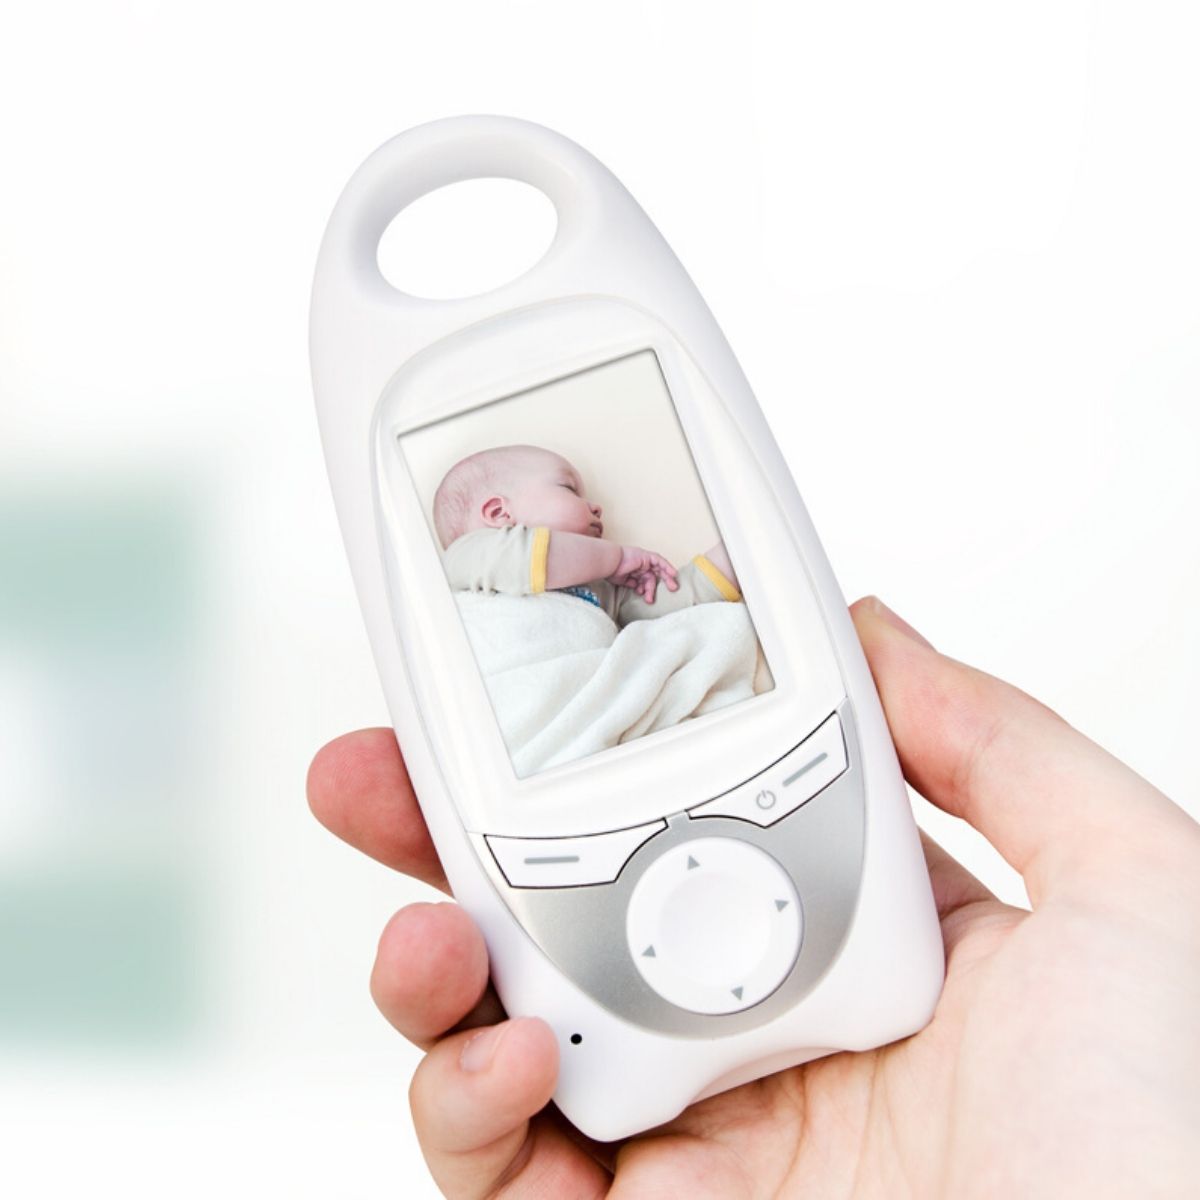 woman's hand holding up a baby monitor with an image of an infant on the monitor